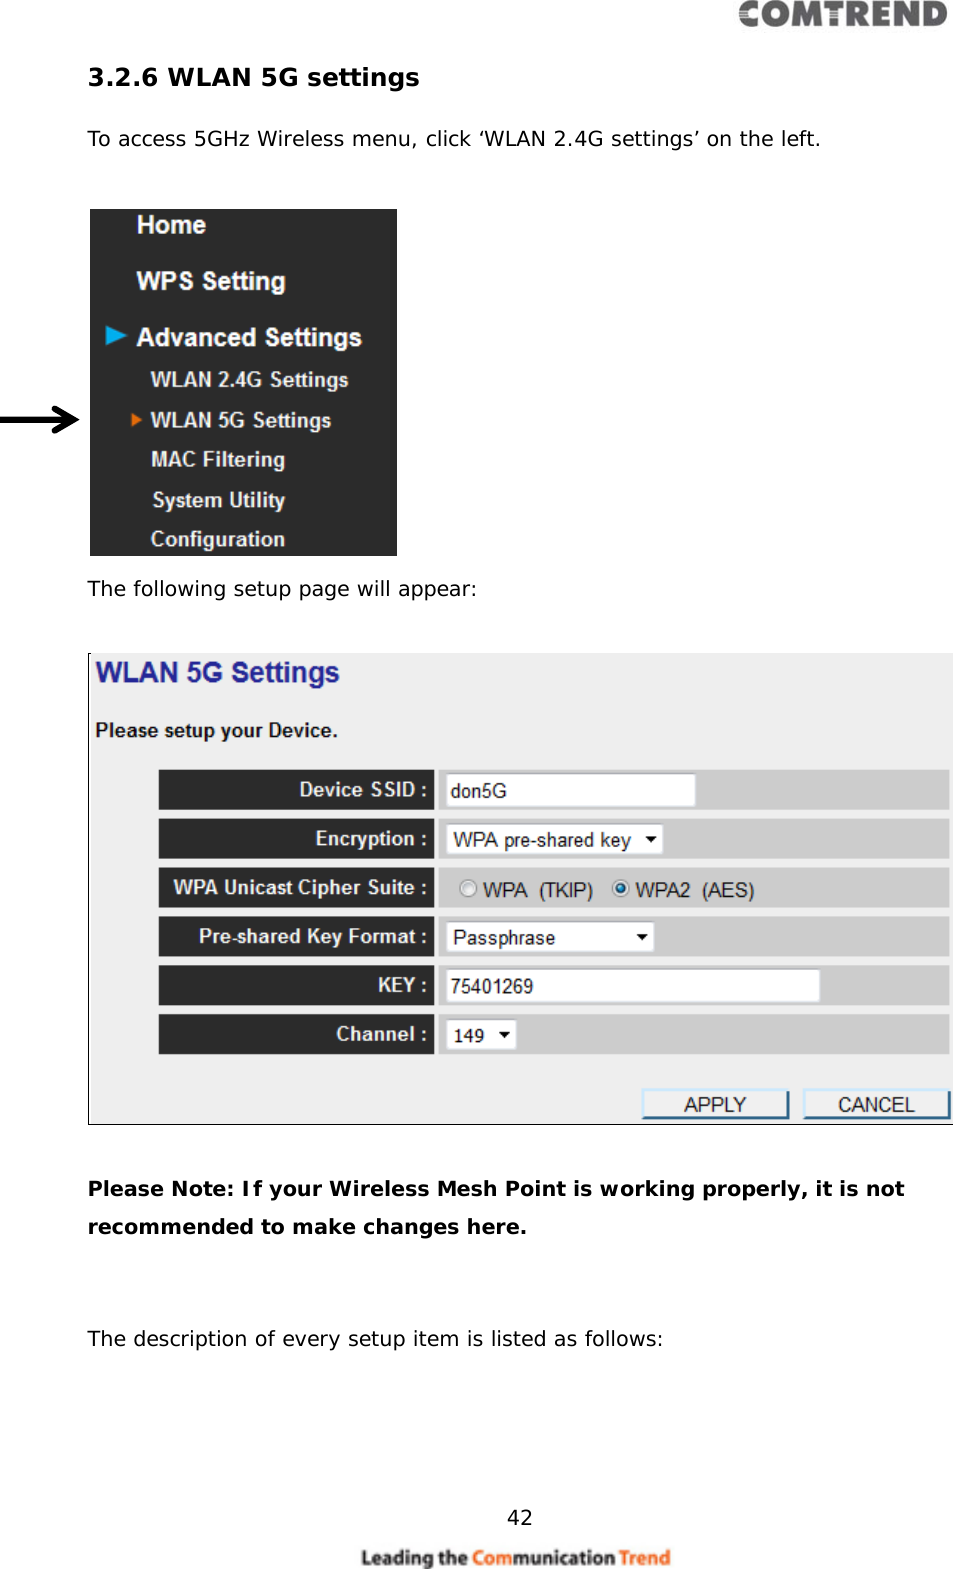     42  3.2.6 WLAN 5G settings To access 5GHz Wireless menu, click ‘WLAN 2.4G settings’ on the left.   The following setup page will appear:    Please Note: If your Wireless Mesh Point is working properly, it is not recommended to make changes here.   The description of every setup item is listed as follows:    